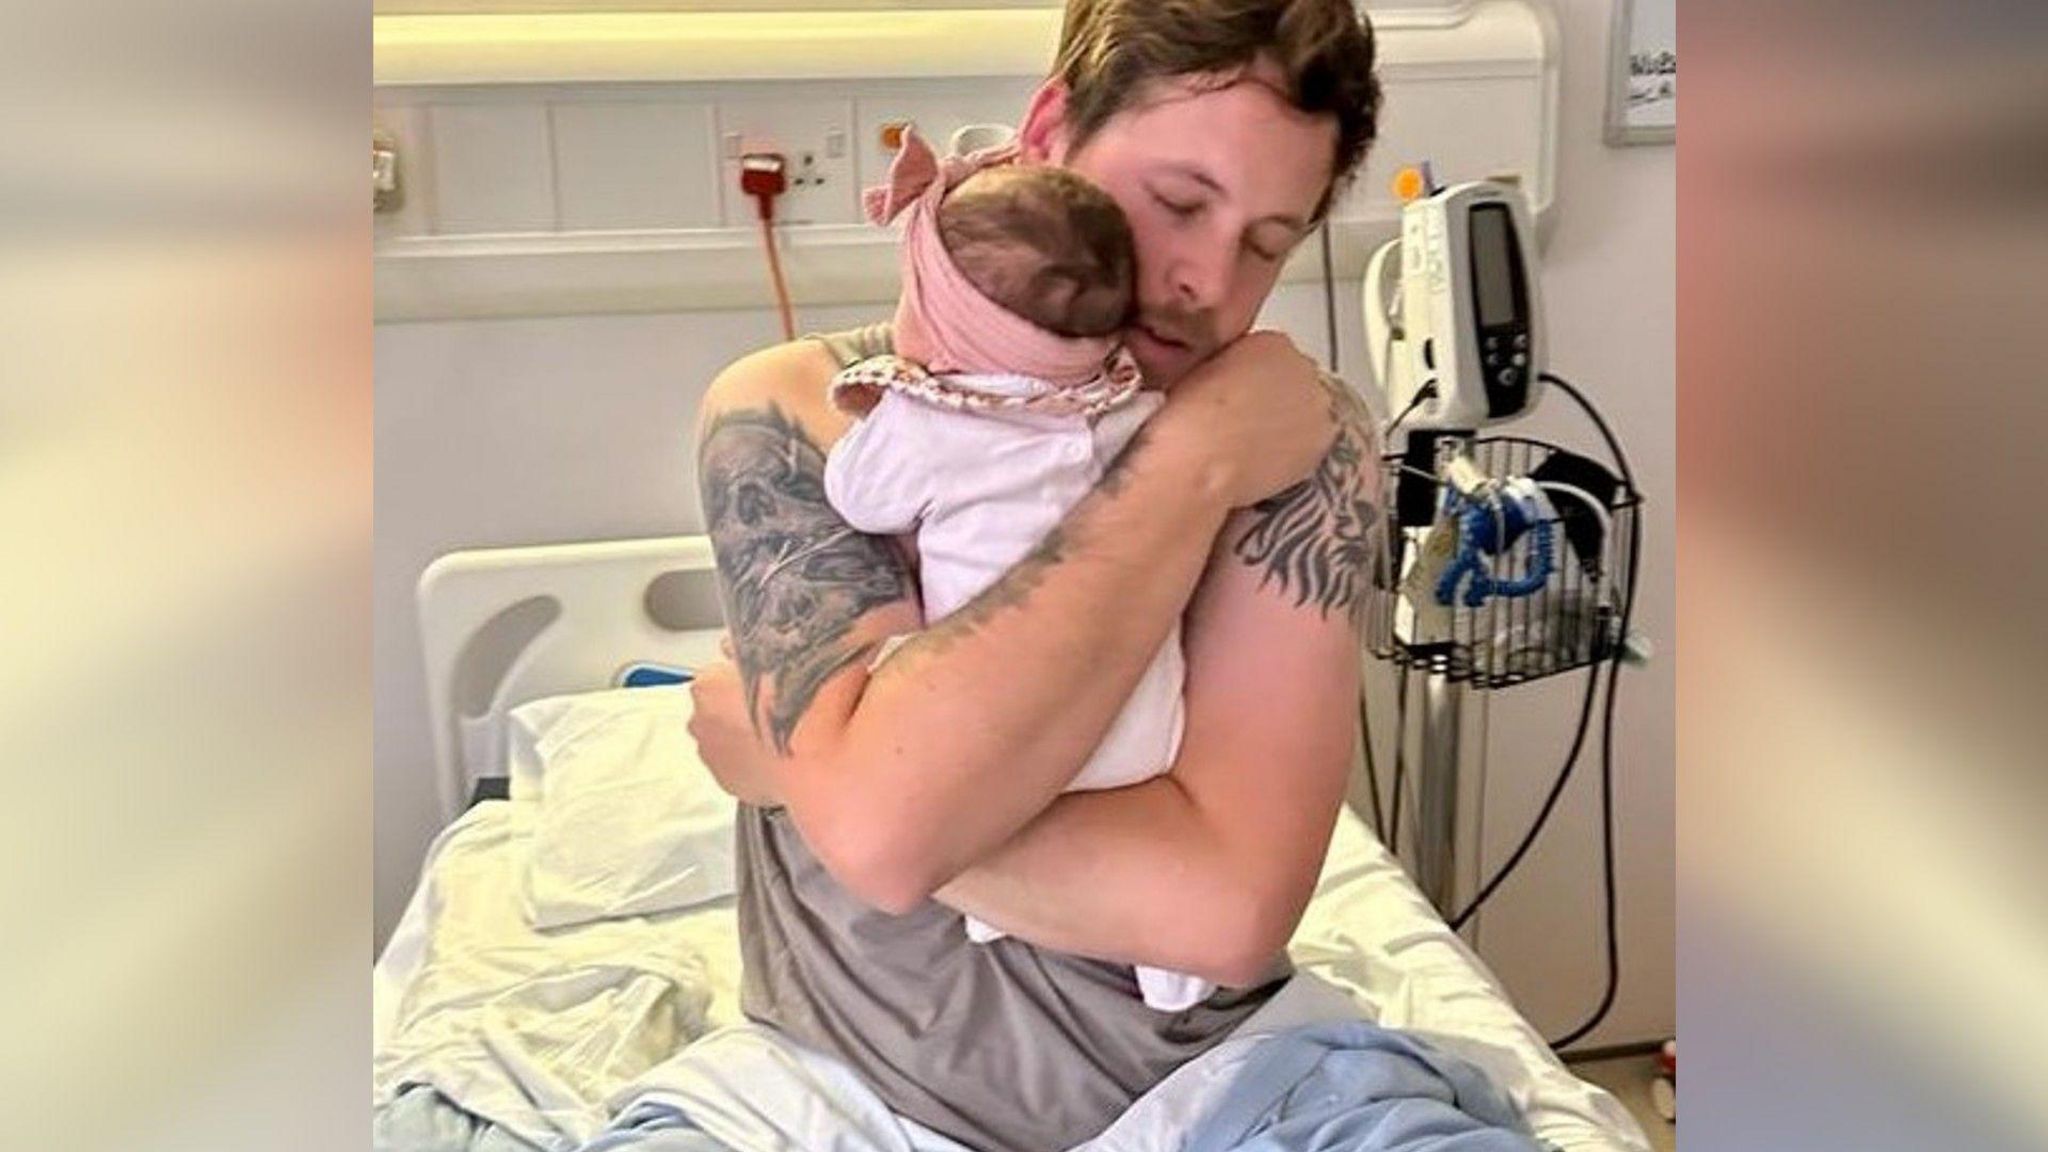 Sam hugging his daughter while sitting in a hospital bed